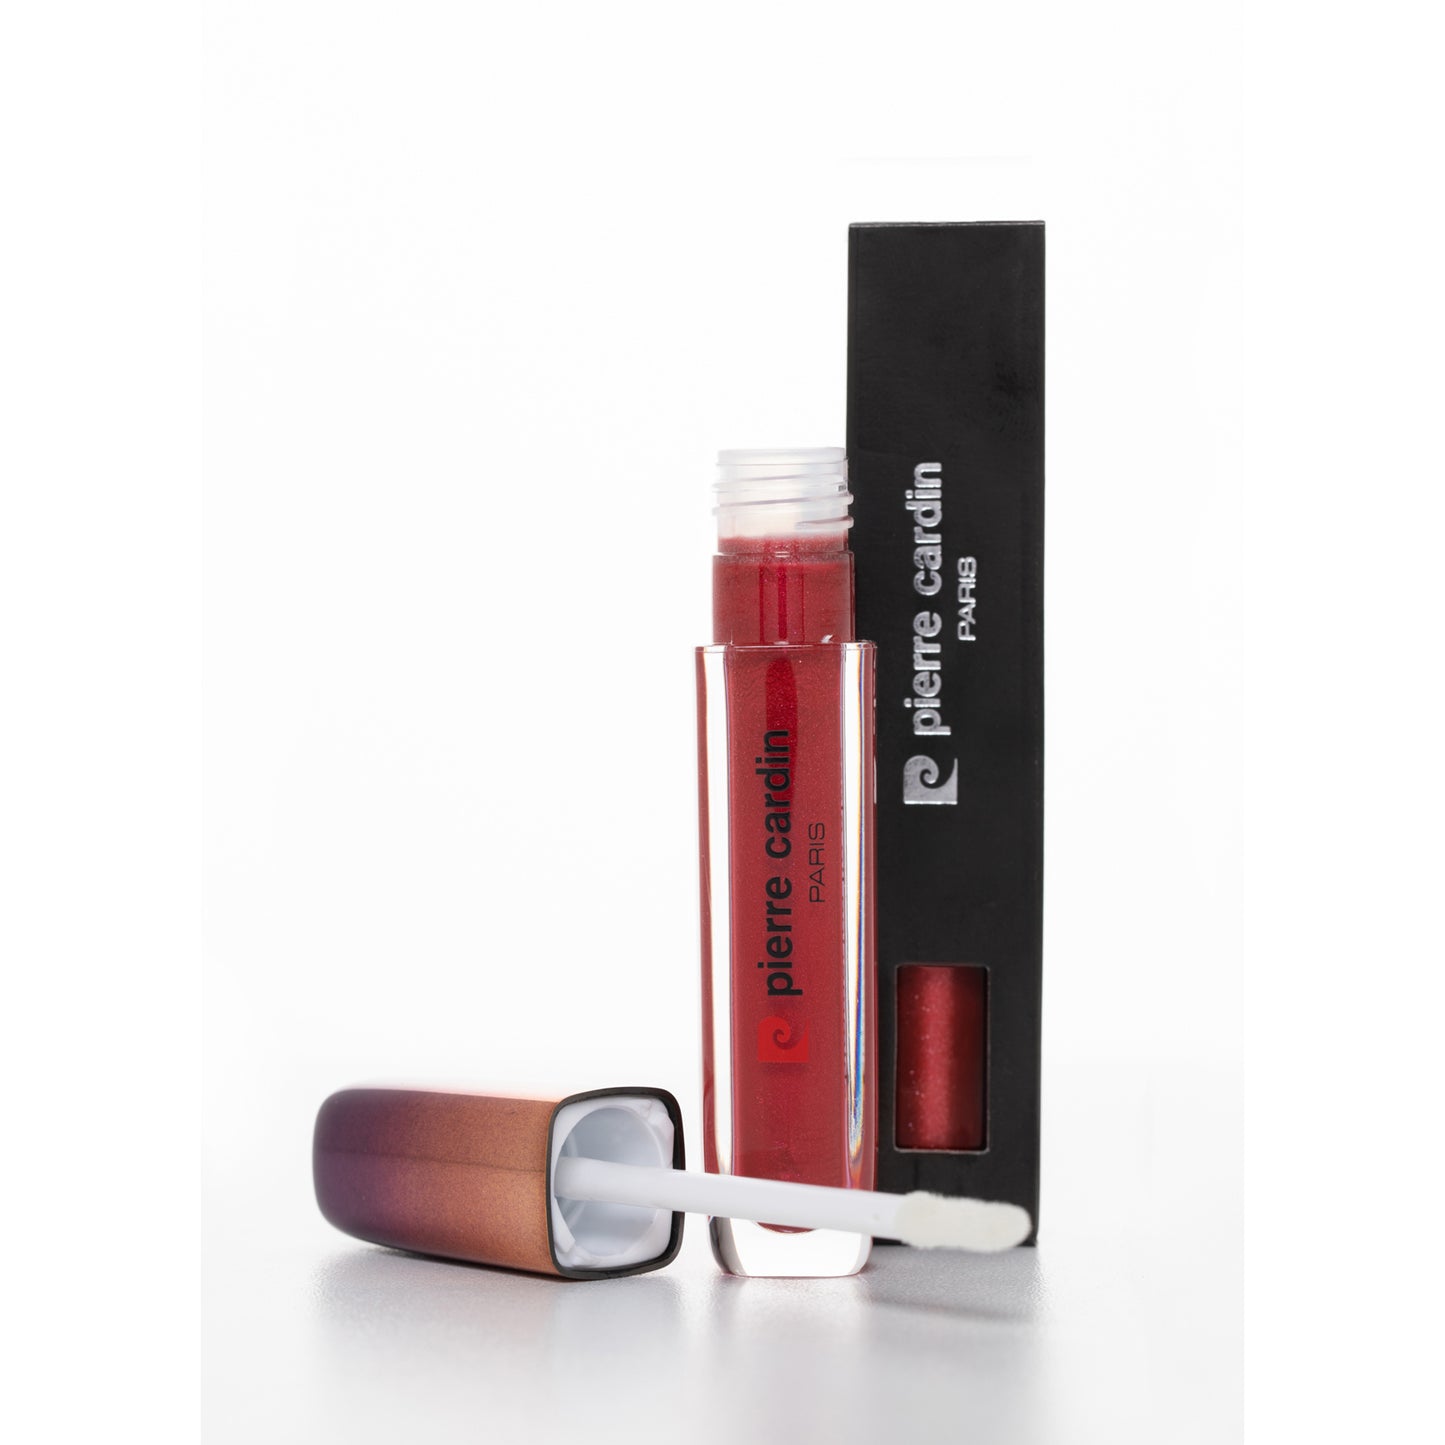 Pierre Cardin Shimmering Lipgloss Rosy Red 510 - 5 ml